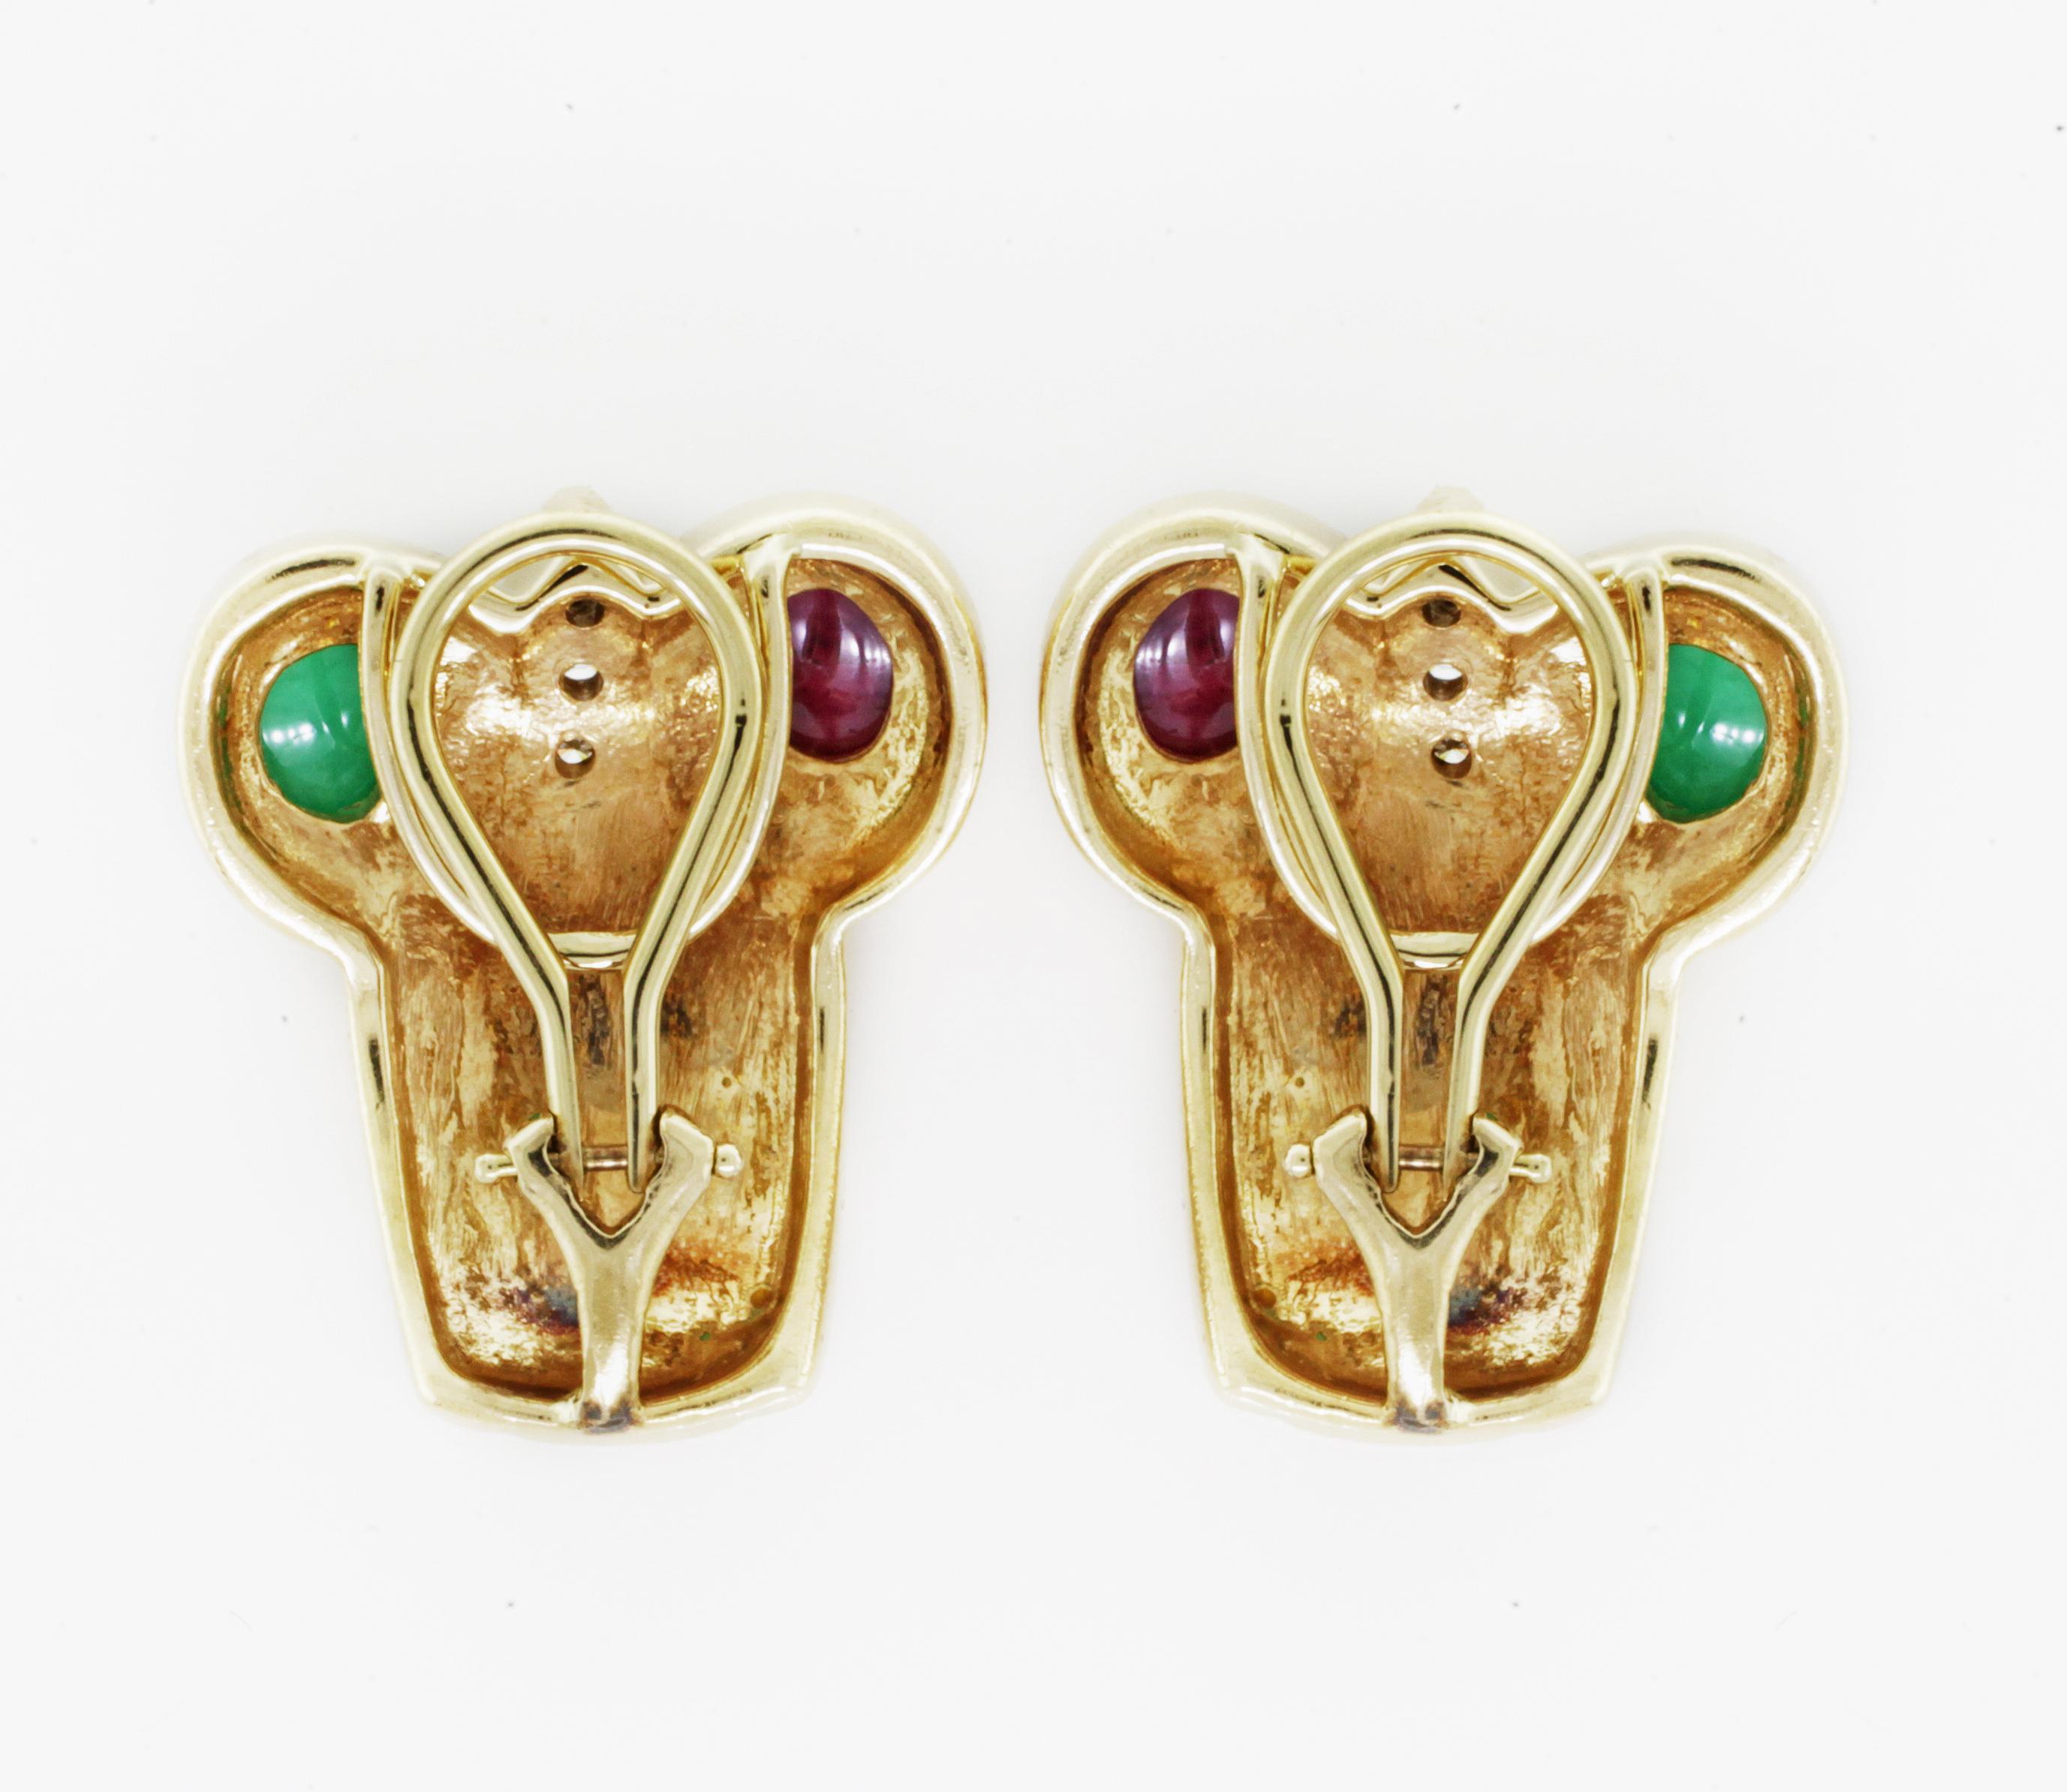 Yellow Gold Diamond Ruby Emerald Ear Clip Earrings

These arty original Retro ear clips from the 1970s are designed with diamonds, rubies and emeralds in 18K yellow gold. They measure 1 inch by by 0.5inch.
Diamond carat weight: 0.06cts approx.
Gems